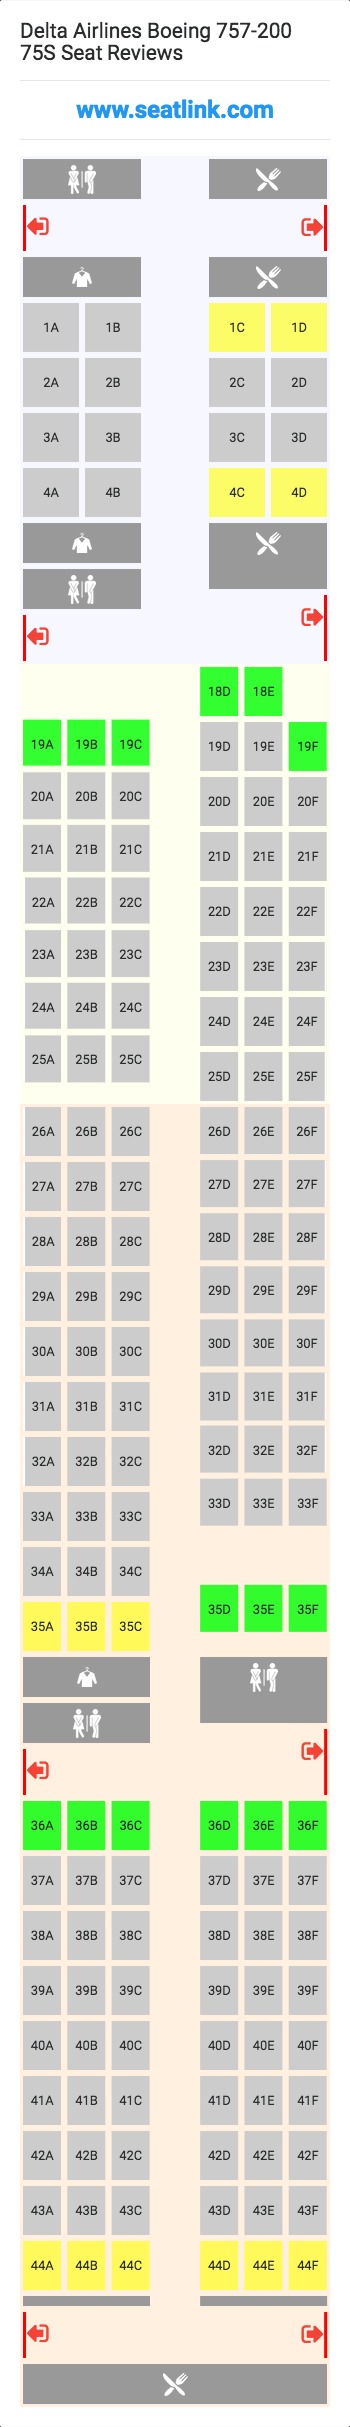 Delta Airlines Airplane Seating Chart